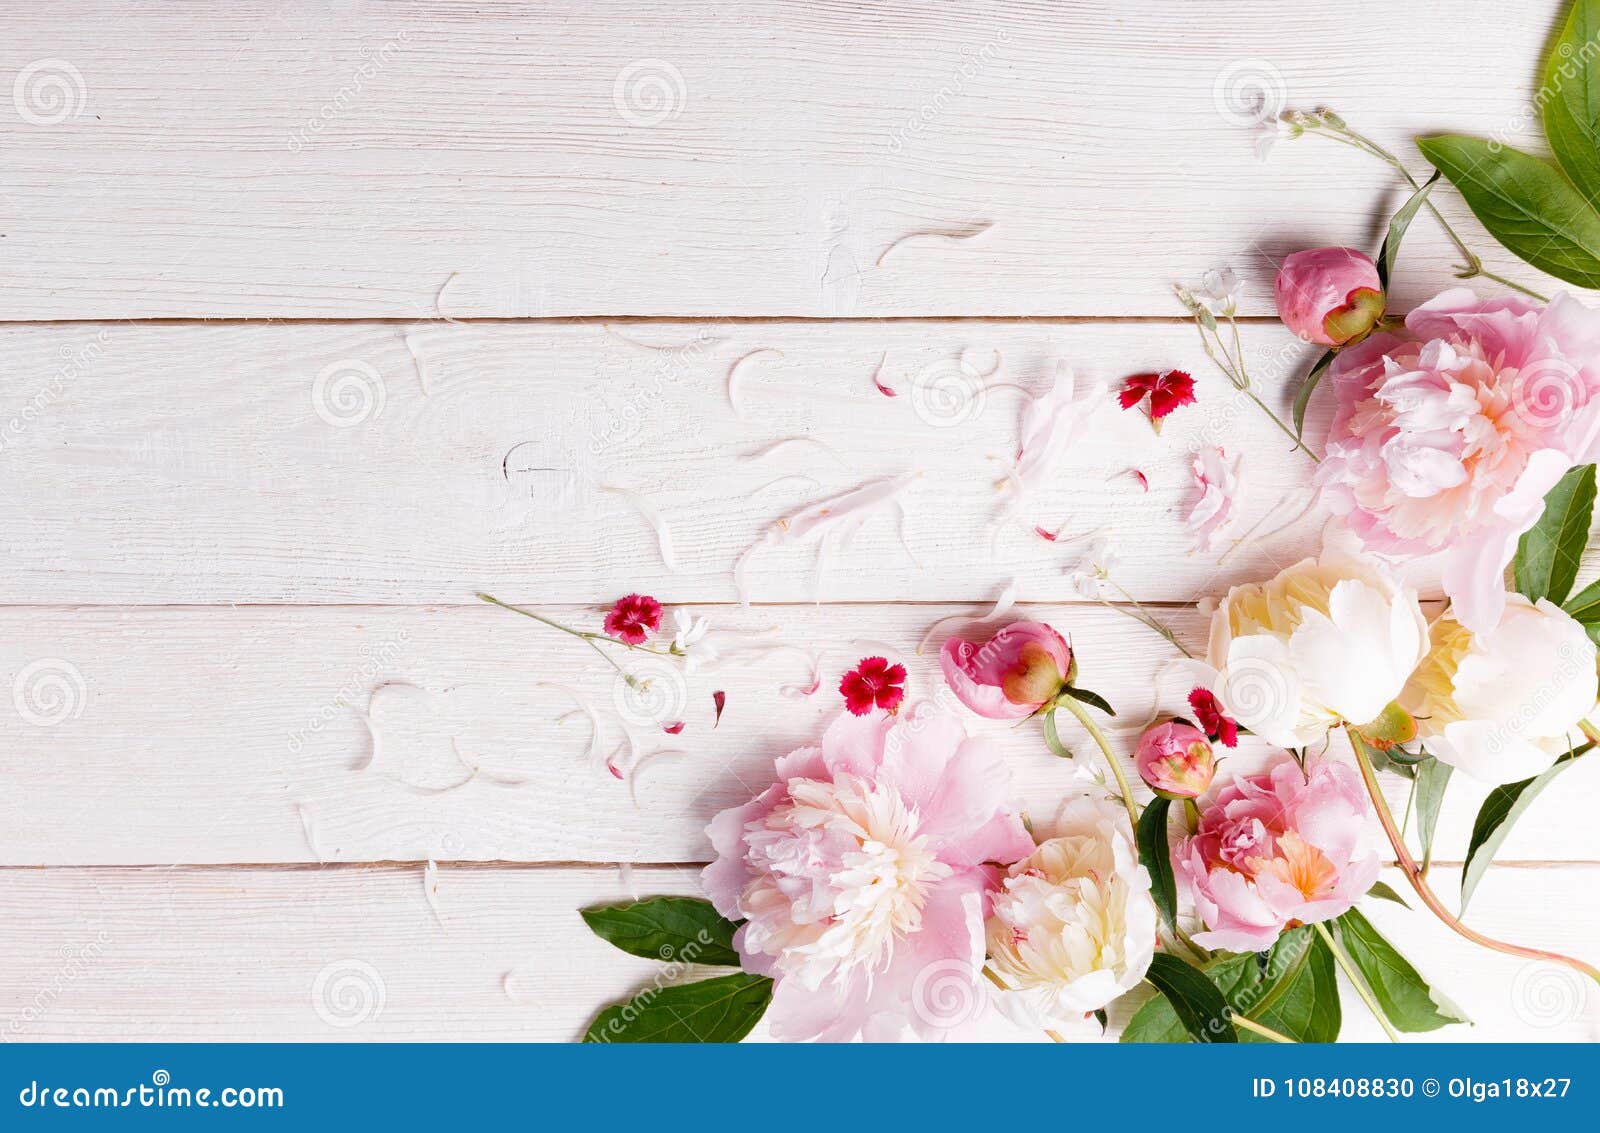 stunning pink peonies on white rustic wooden background. copy space